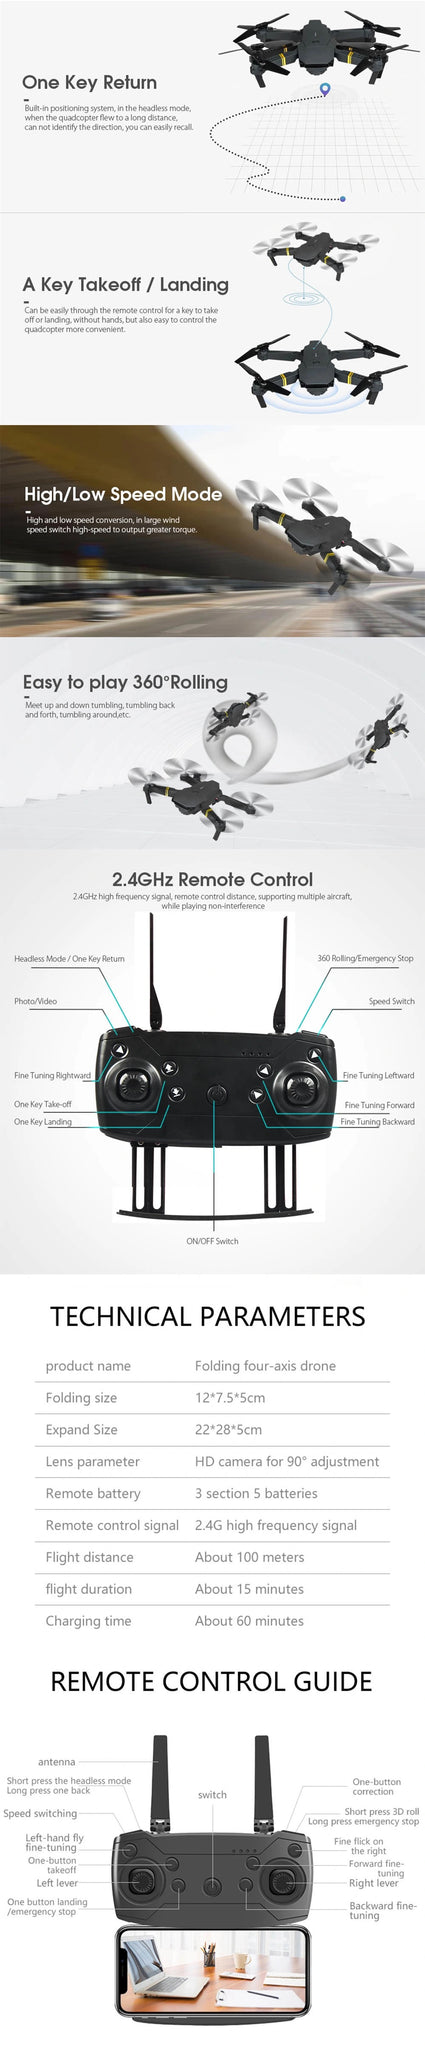 E58 Drone, it have 3-level flight speed to switch that can make more fun with